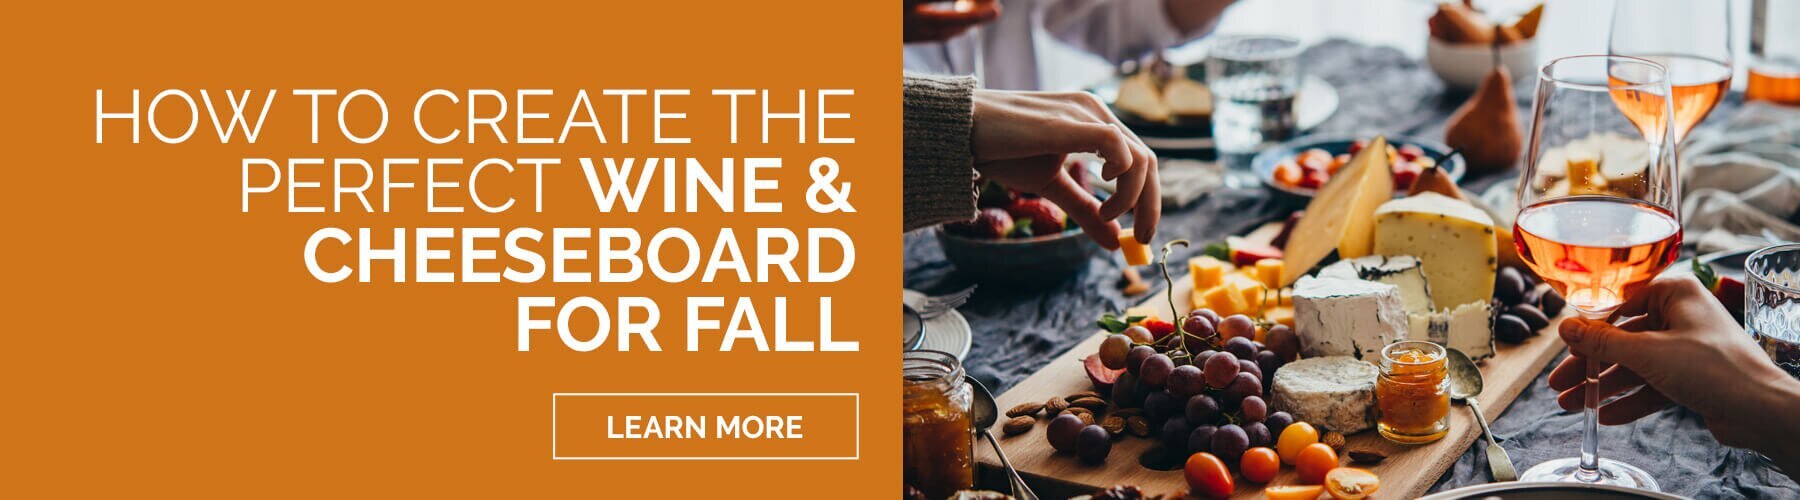 Learn More About Wine and Cheeseboard Planning and Pairings